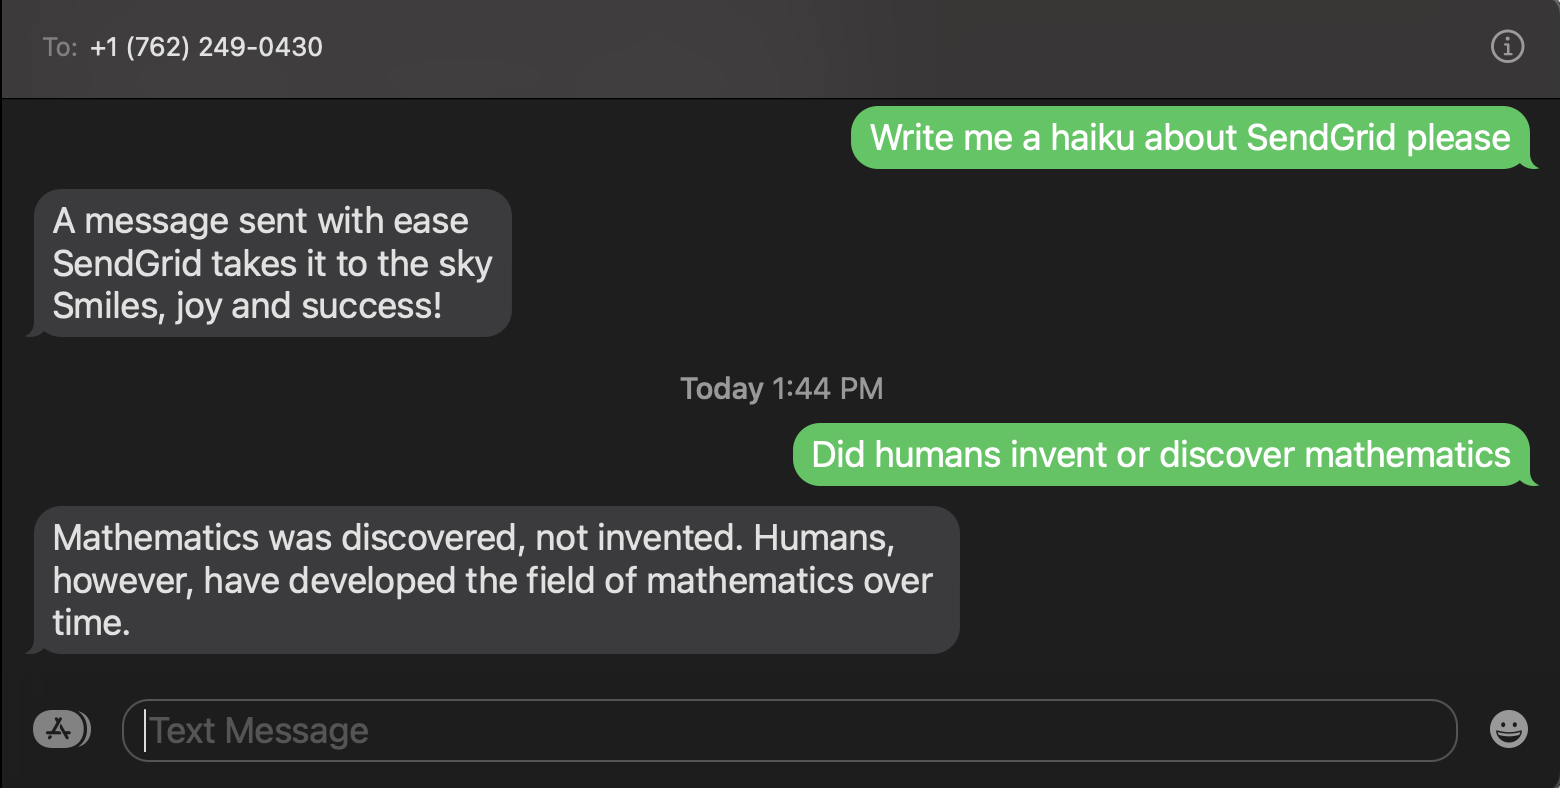 sms asking for a haiku about SendGrid from ChatGPT and also asking if humans invented or discovered math